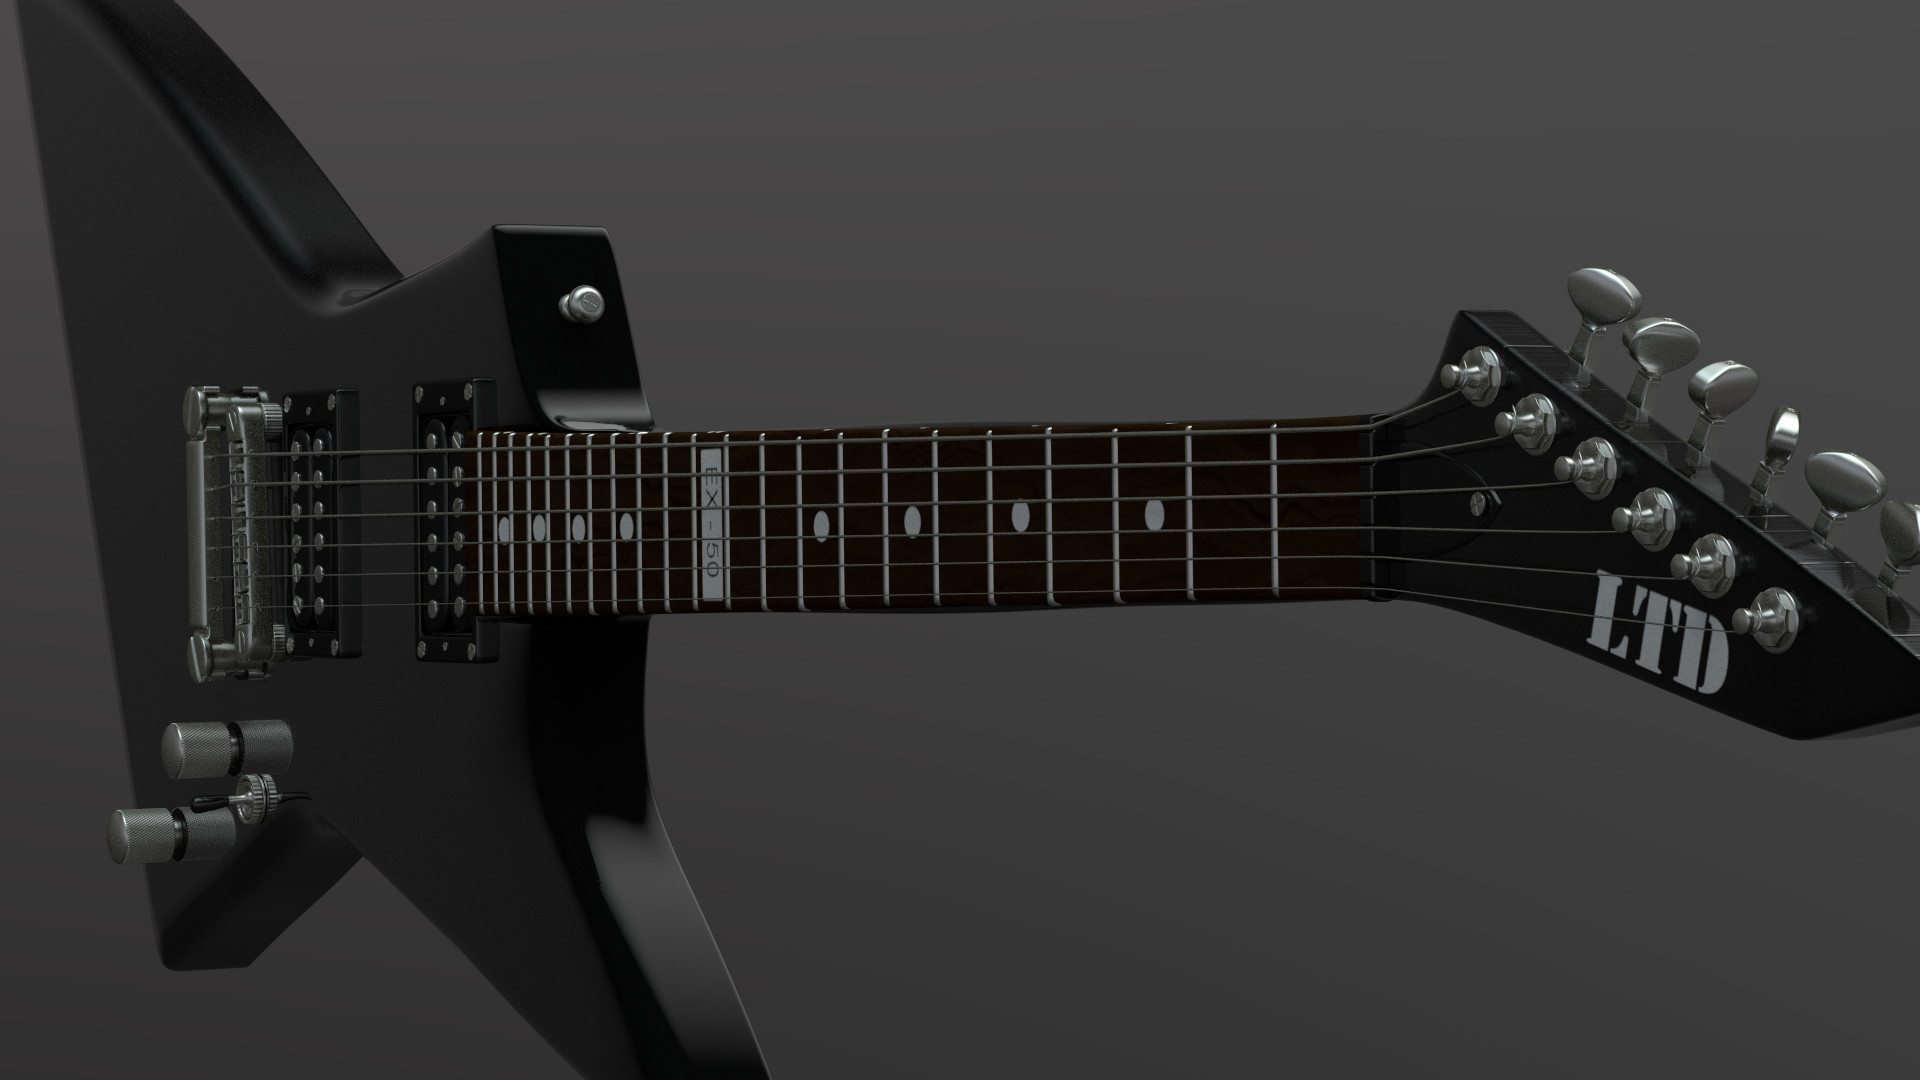 1920x1080 Ever since I have this guitar i admire its beauty every day. I am trying to  get more into building shaders right now. This is pretty much a work in  progress ...